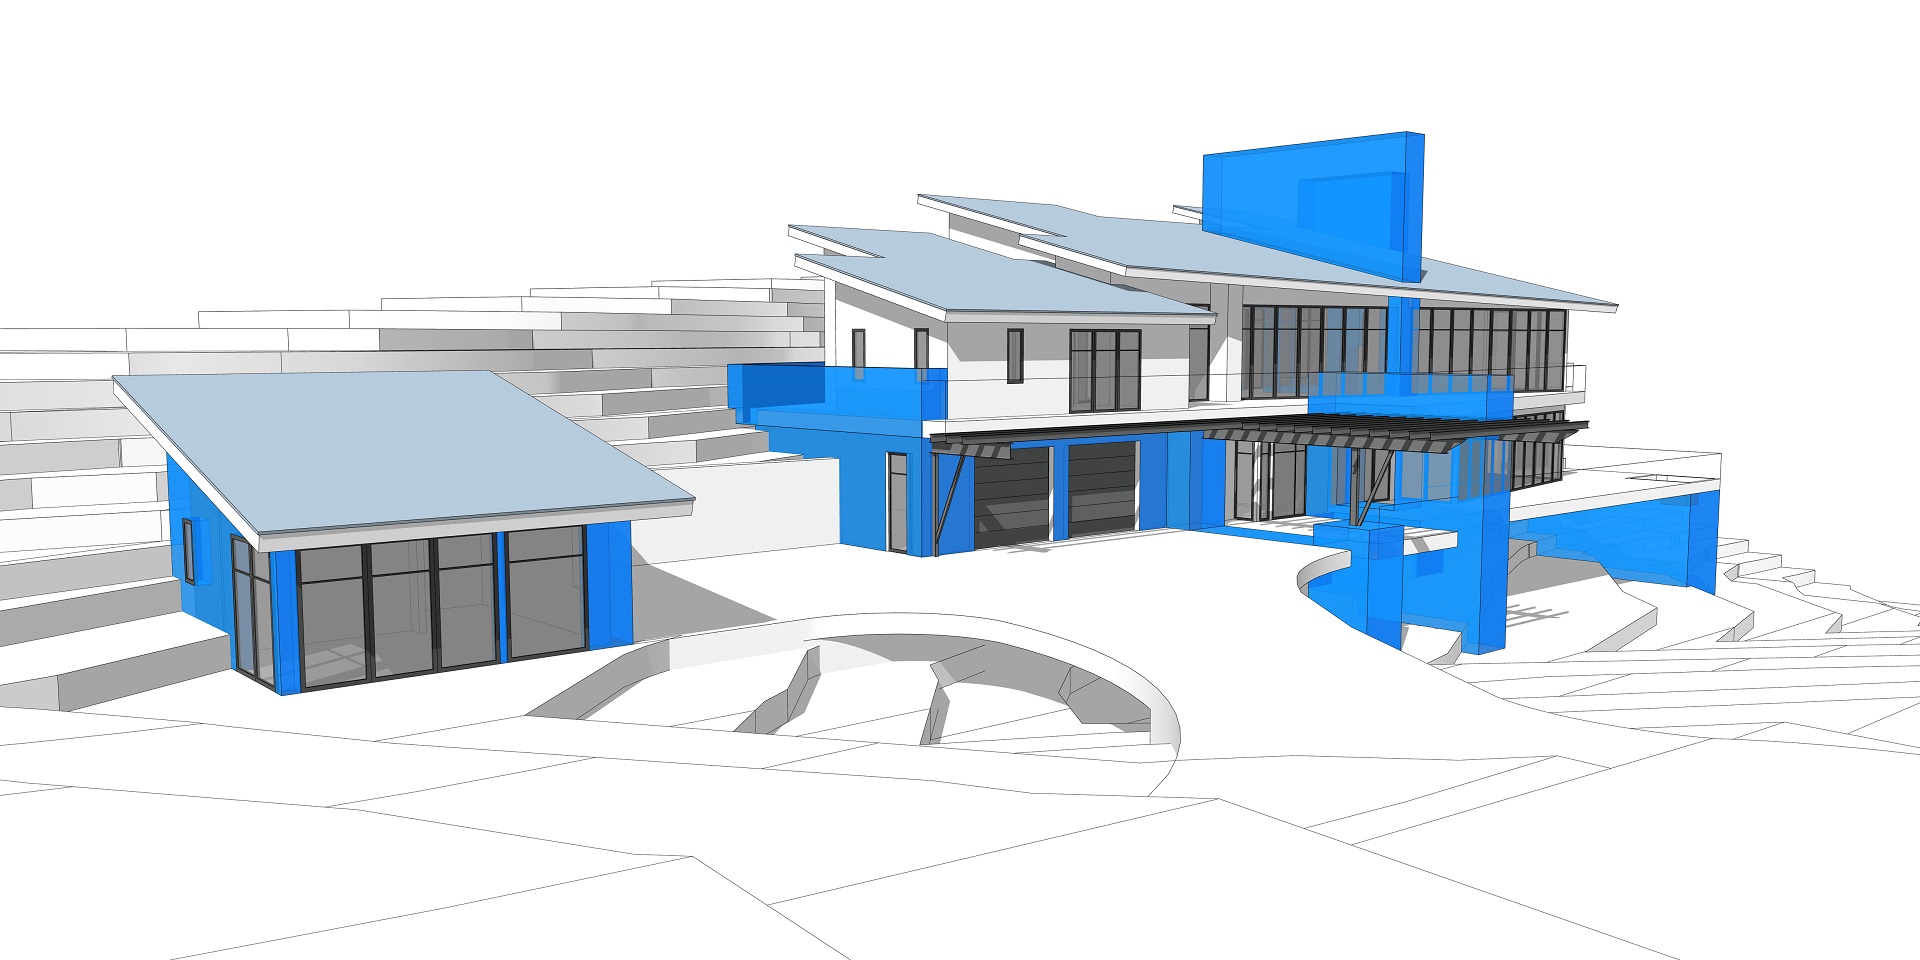 Sketchup View of the Residence